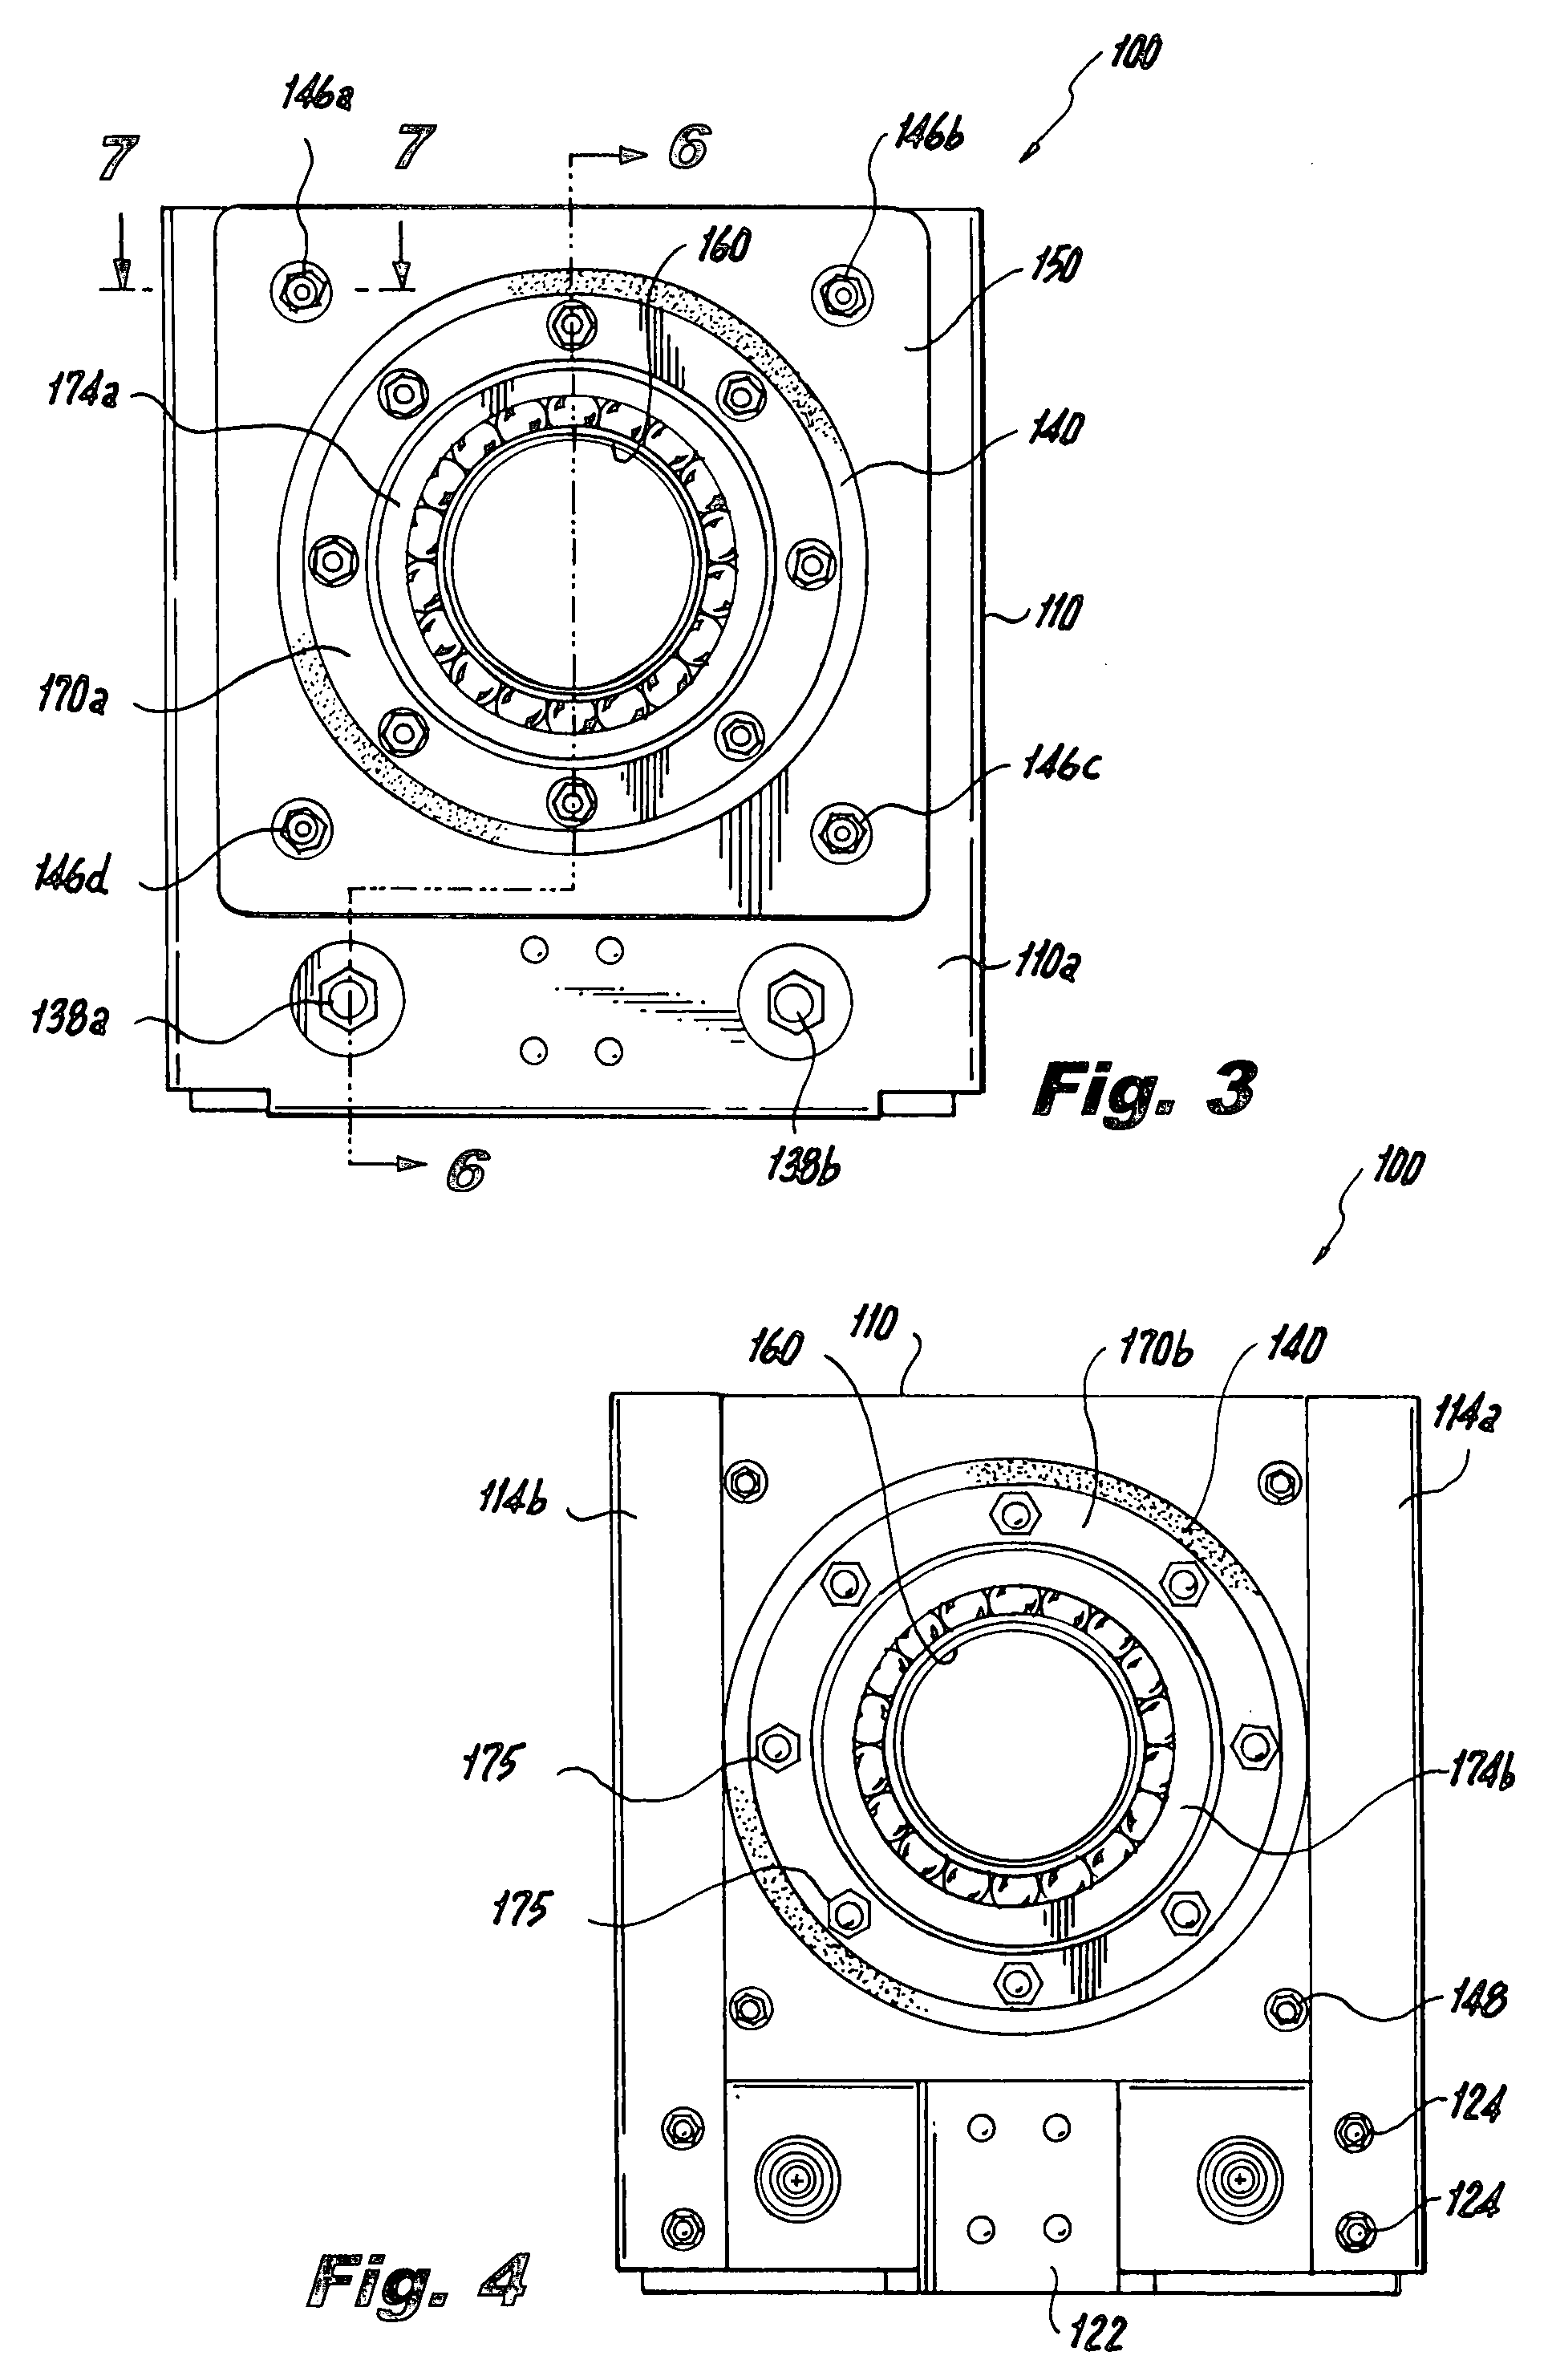 Radially compliant bearing hanger for rotating shafts